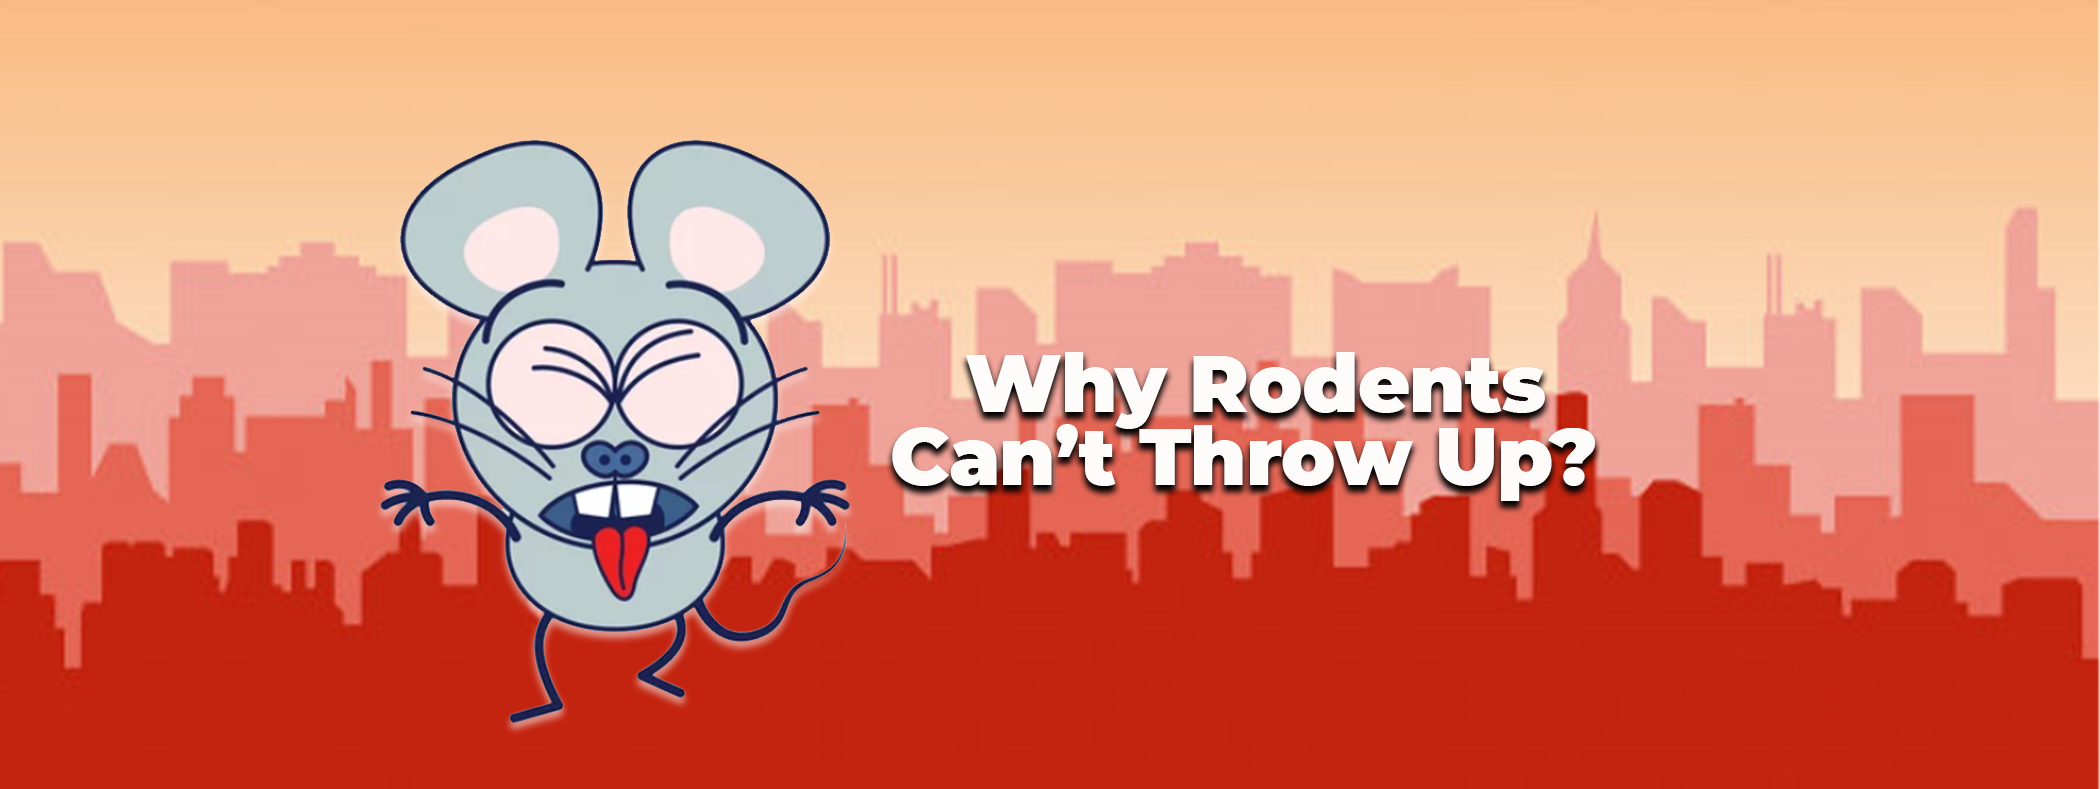 Did you Know that Rodents Cant Throw Up